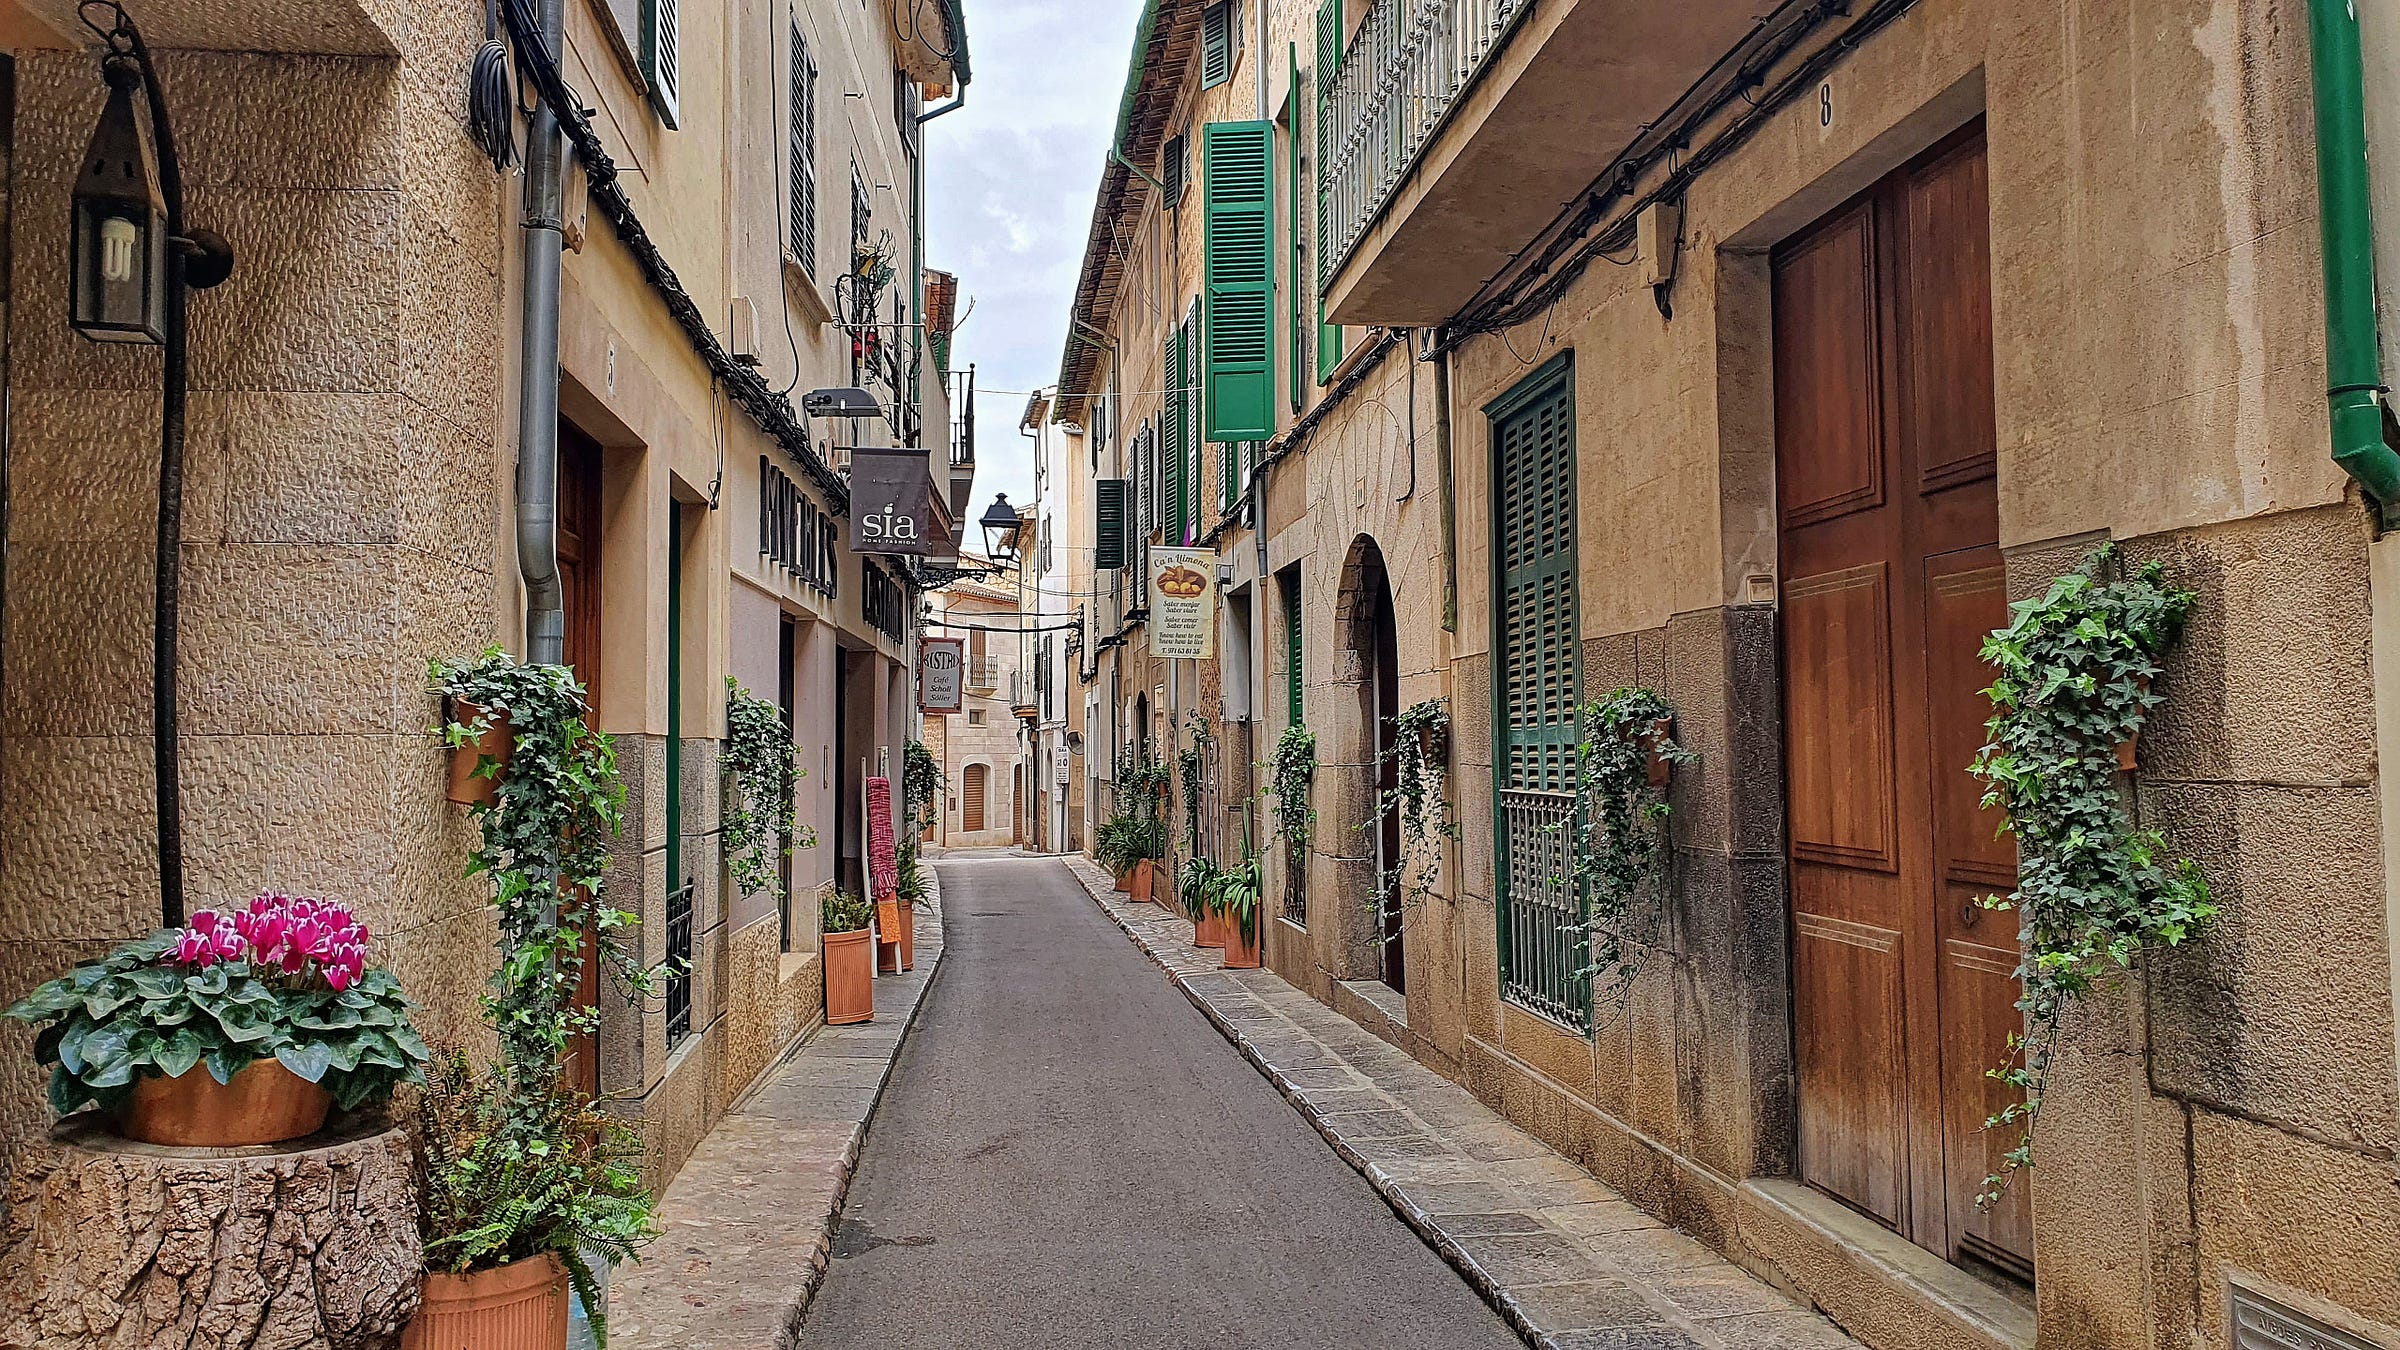 View of a typical street in Soller